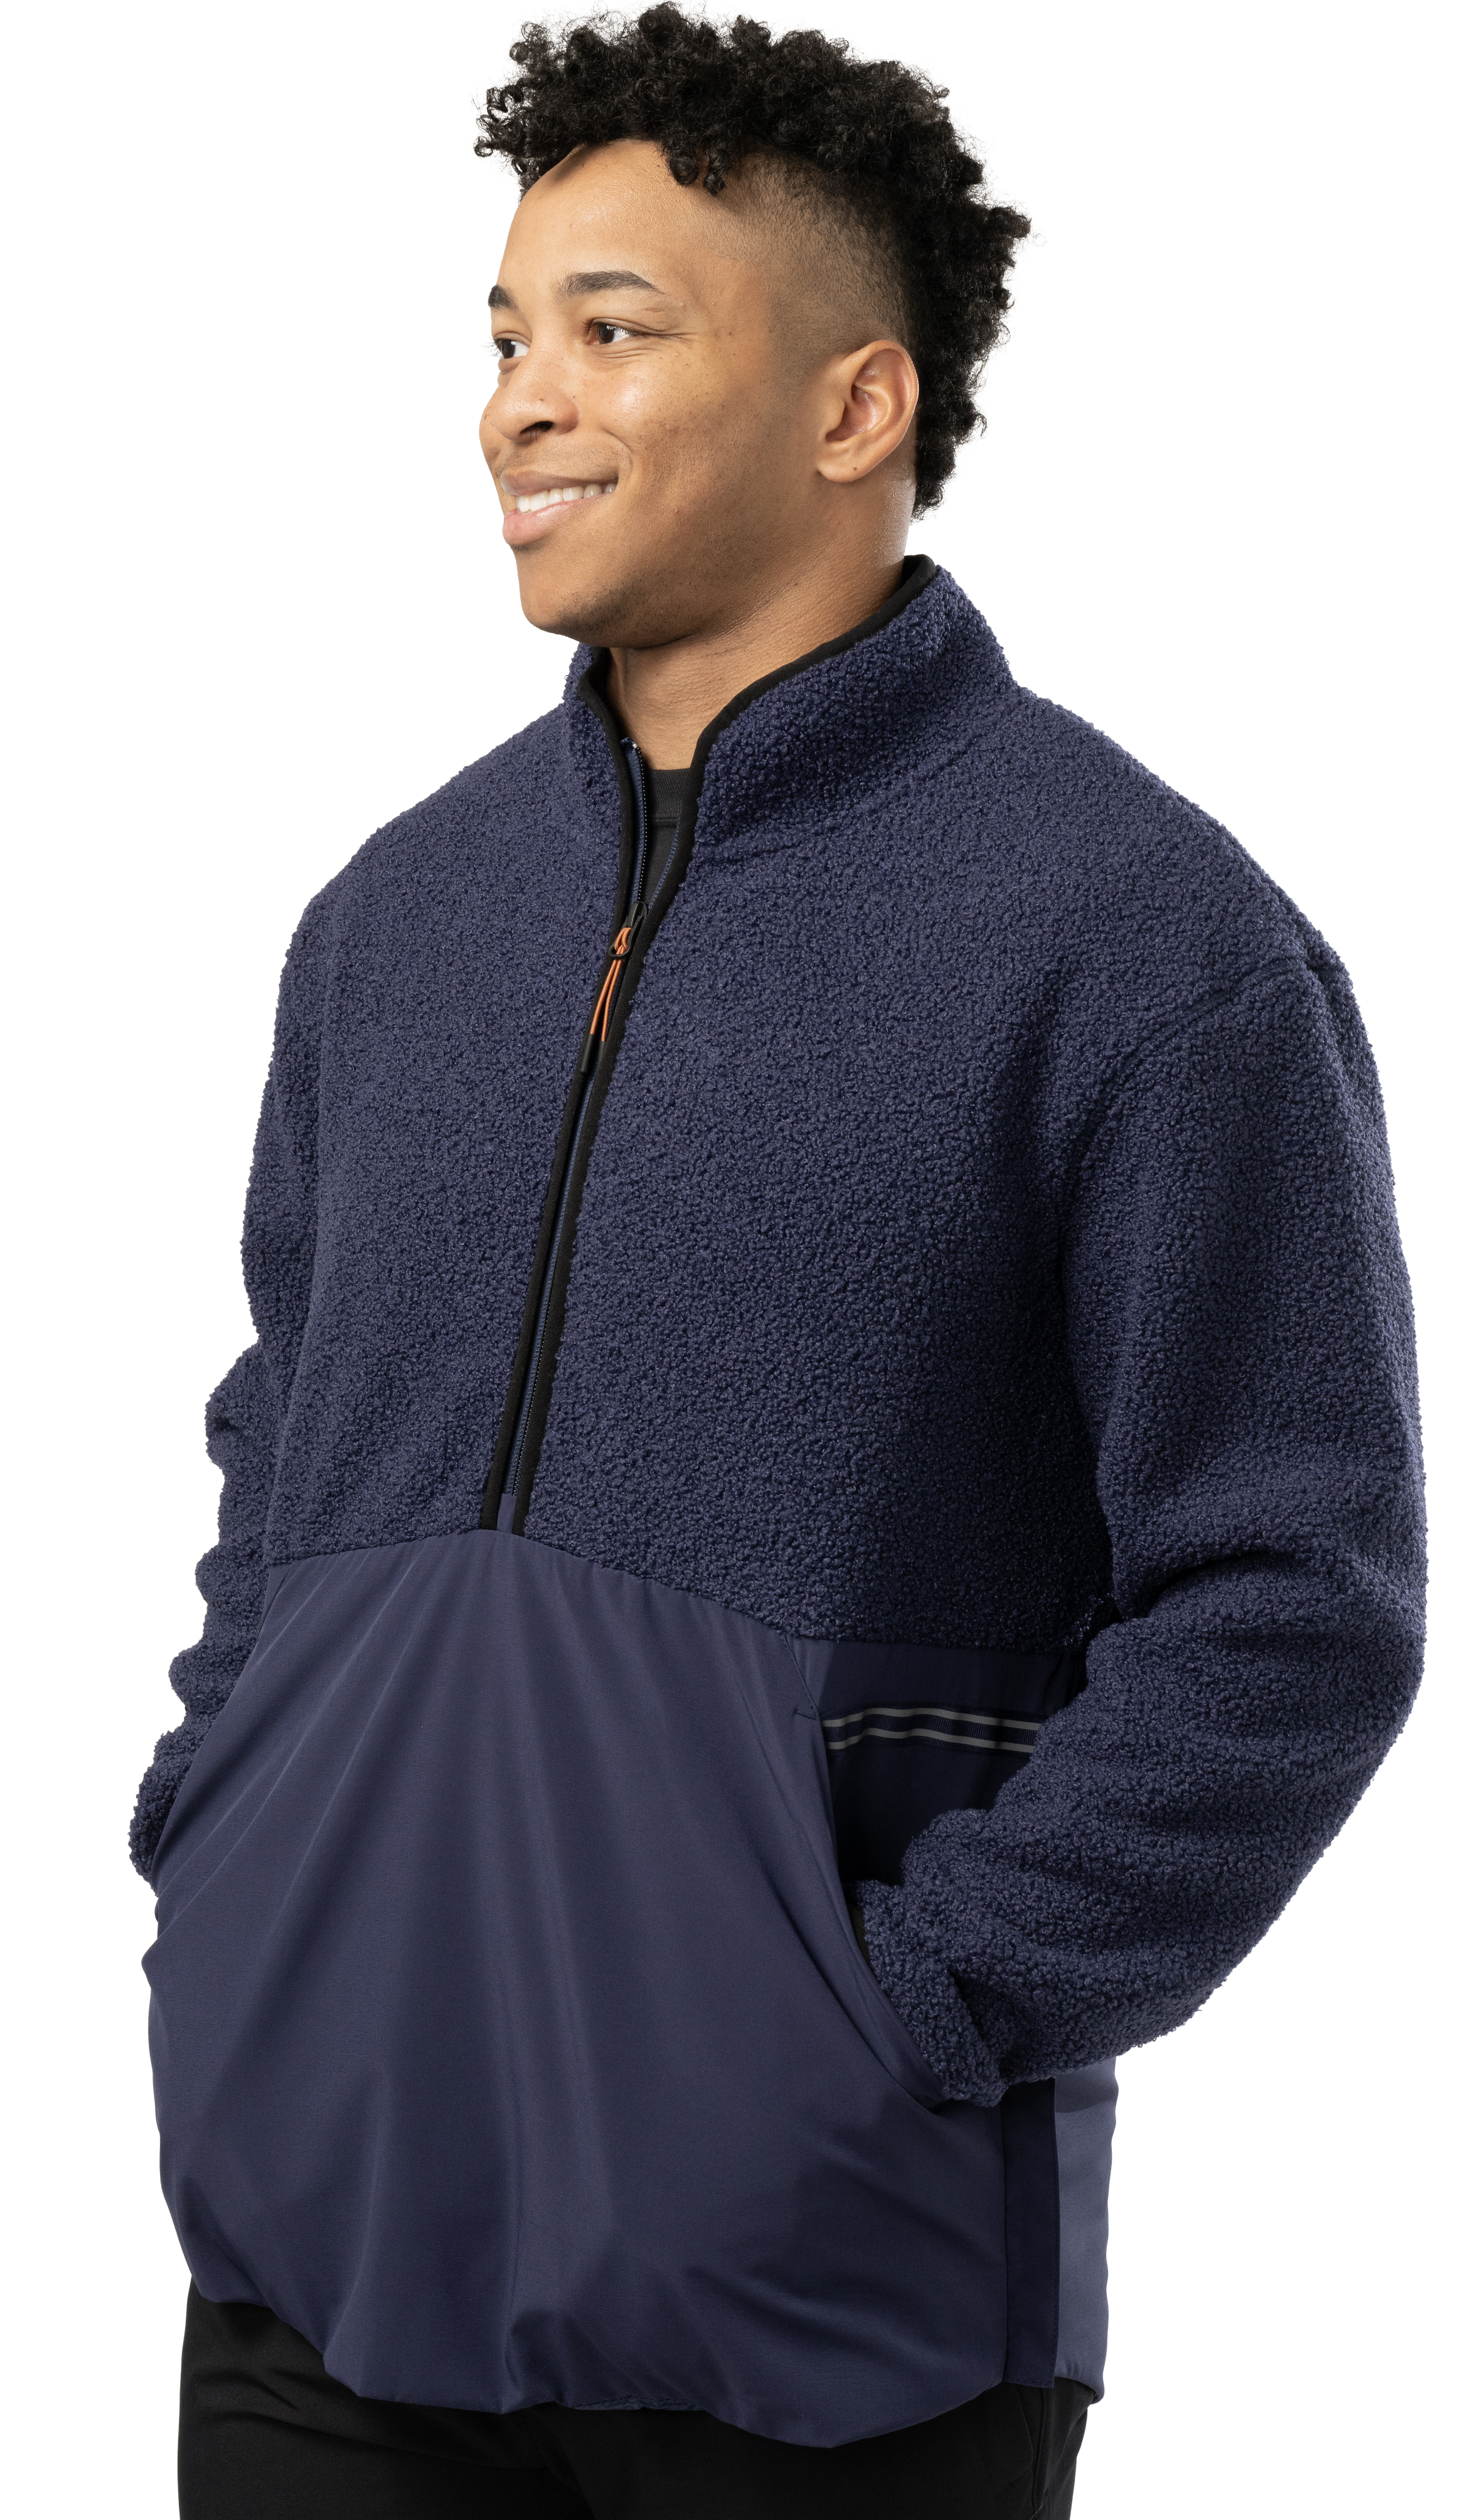 Bauer Fleece Warmth Knit Jogger Adult –